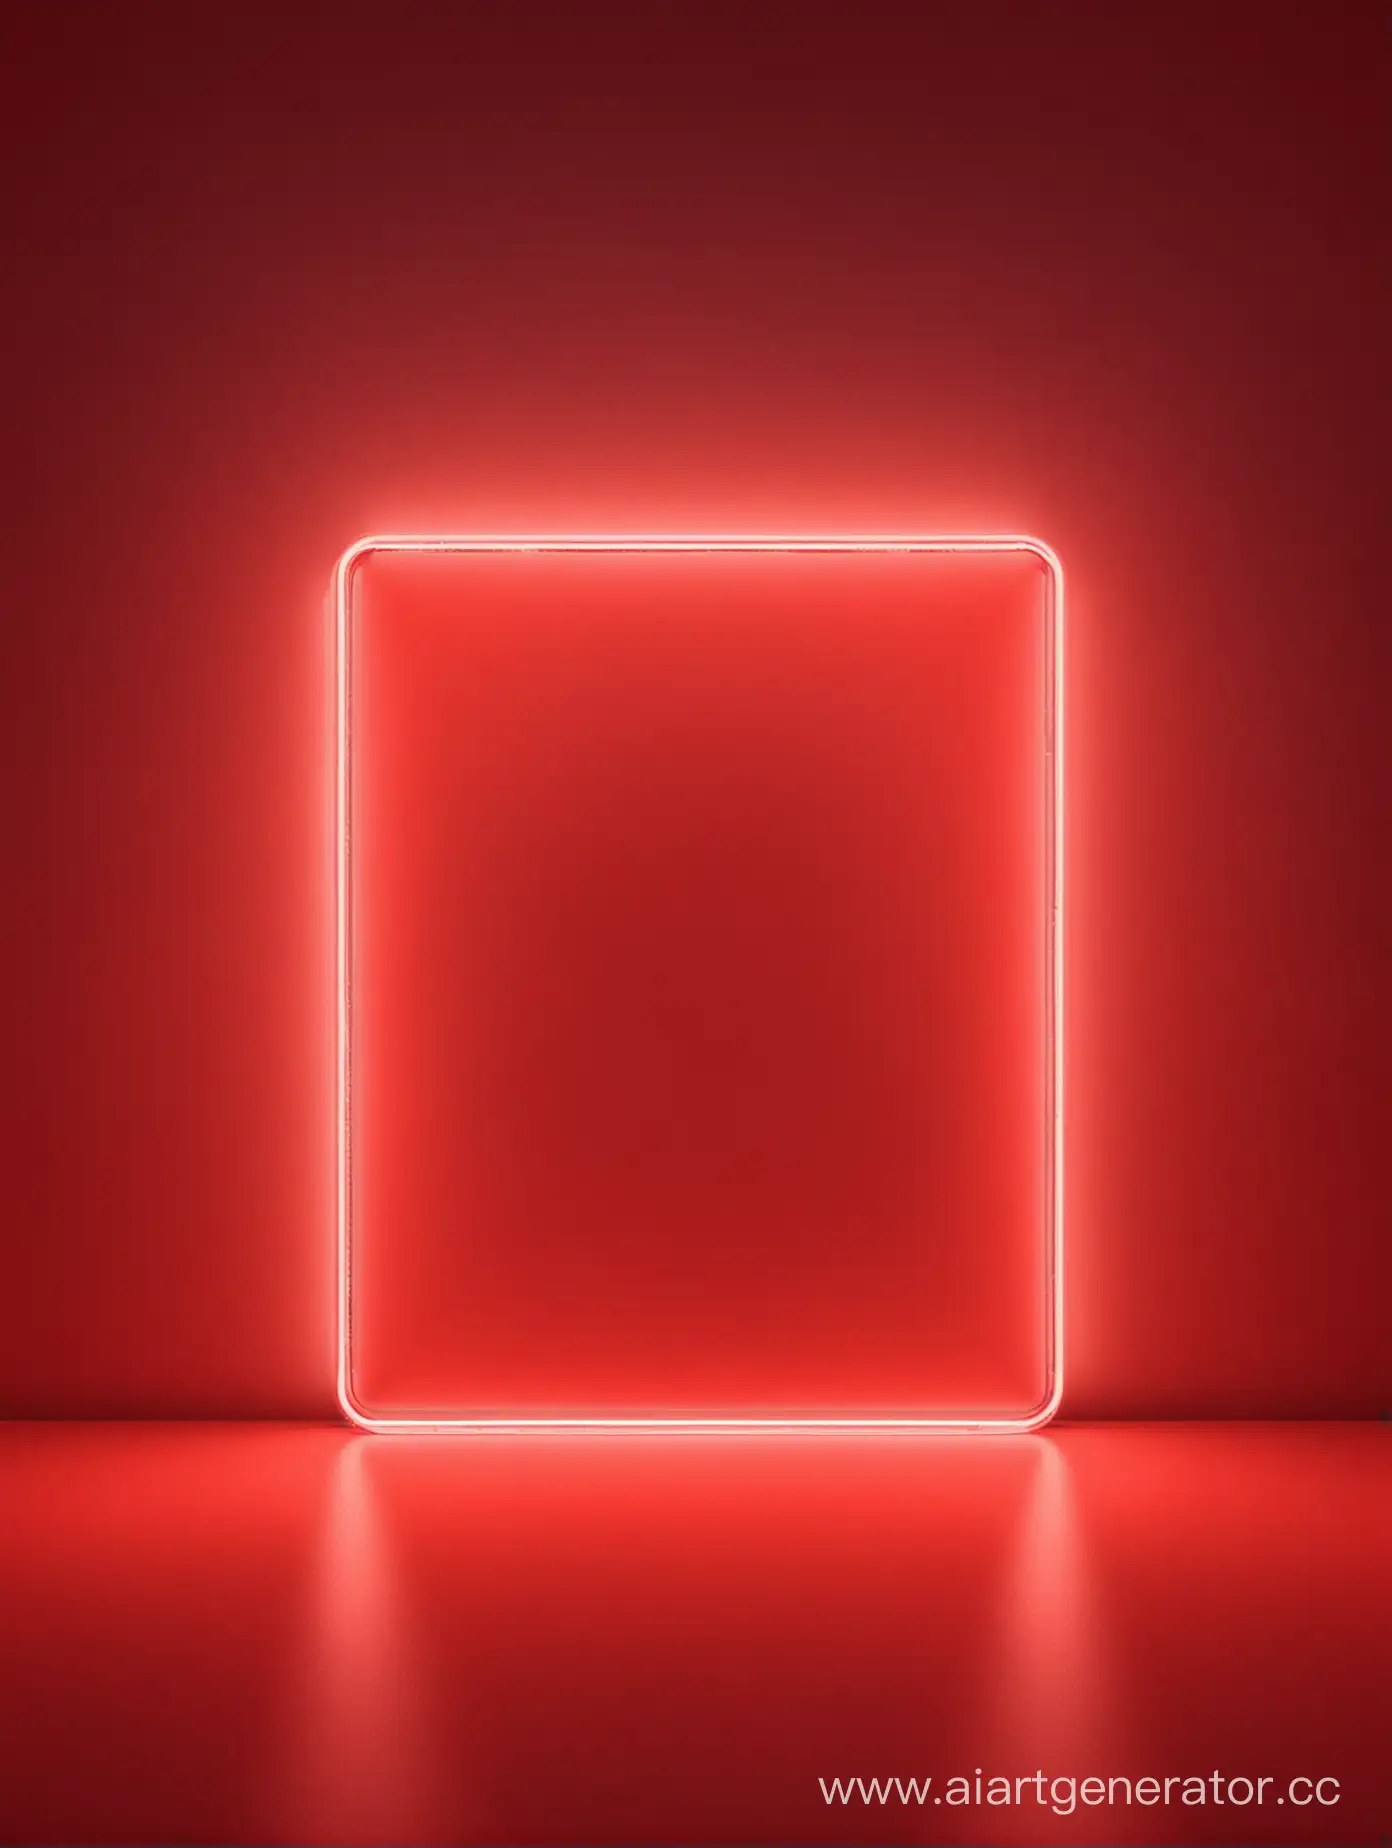 
red neon background for product card on wb
